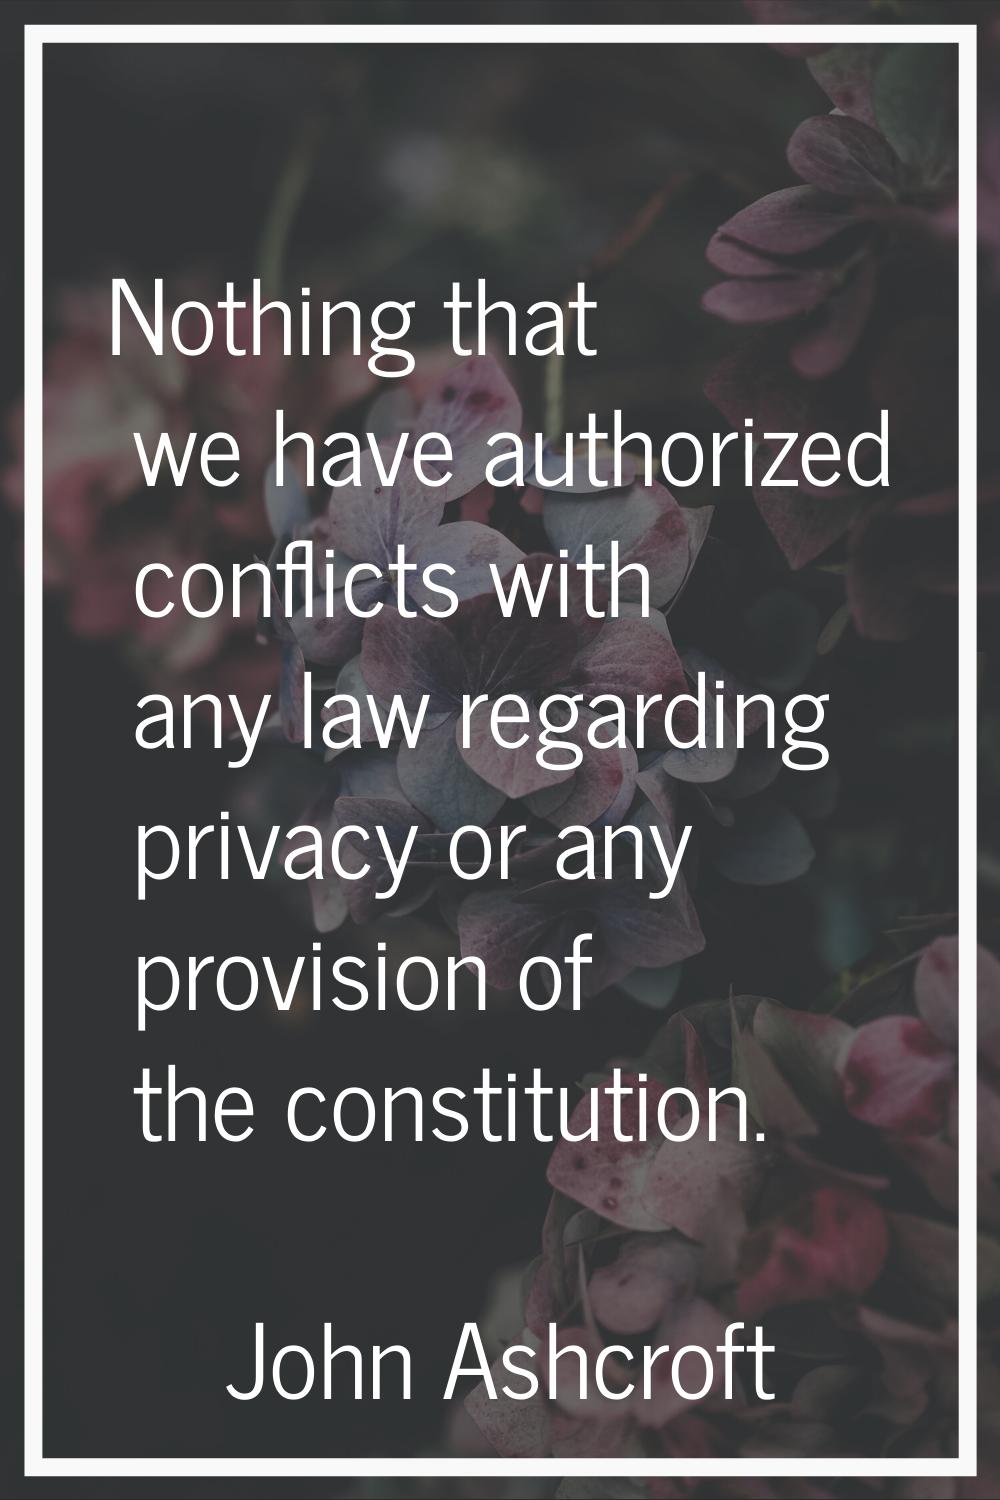 Nothing that we have authorized conflicts with any law regarding privacy or any provision of the co